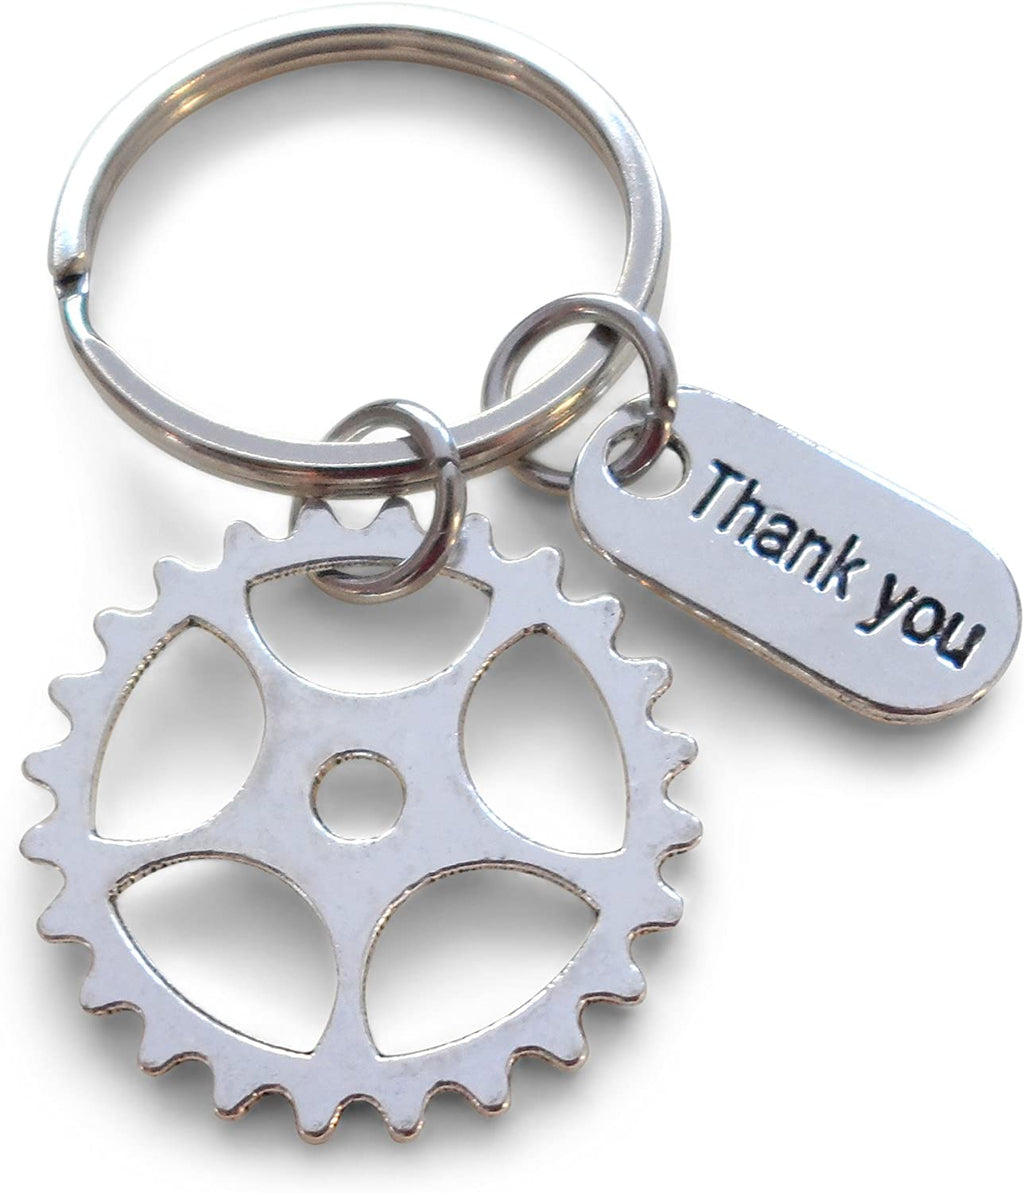 Employee Appreciation Gifts • "Thank You" Tag & Silver Gear Keychain by JewelryEveryday w/ "Thanks for being an essential part of our team!" Card